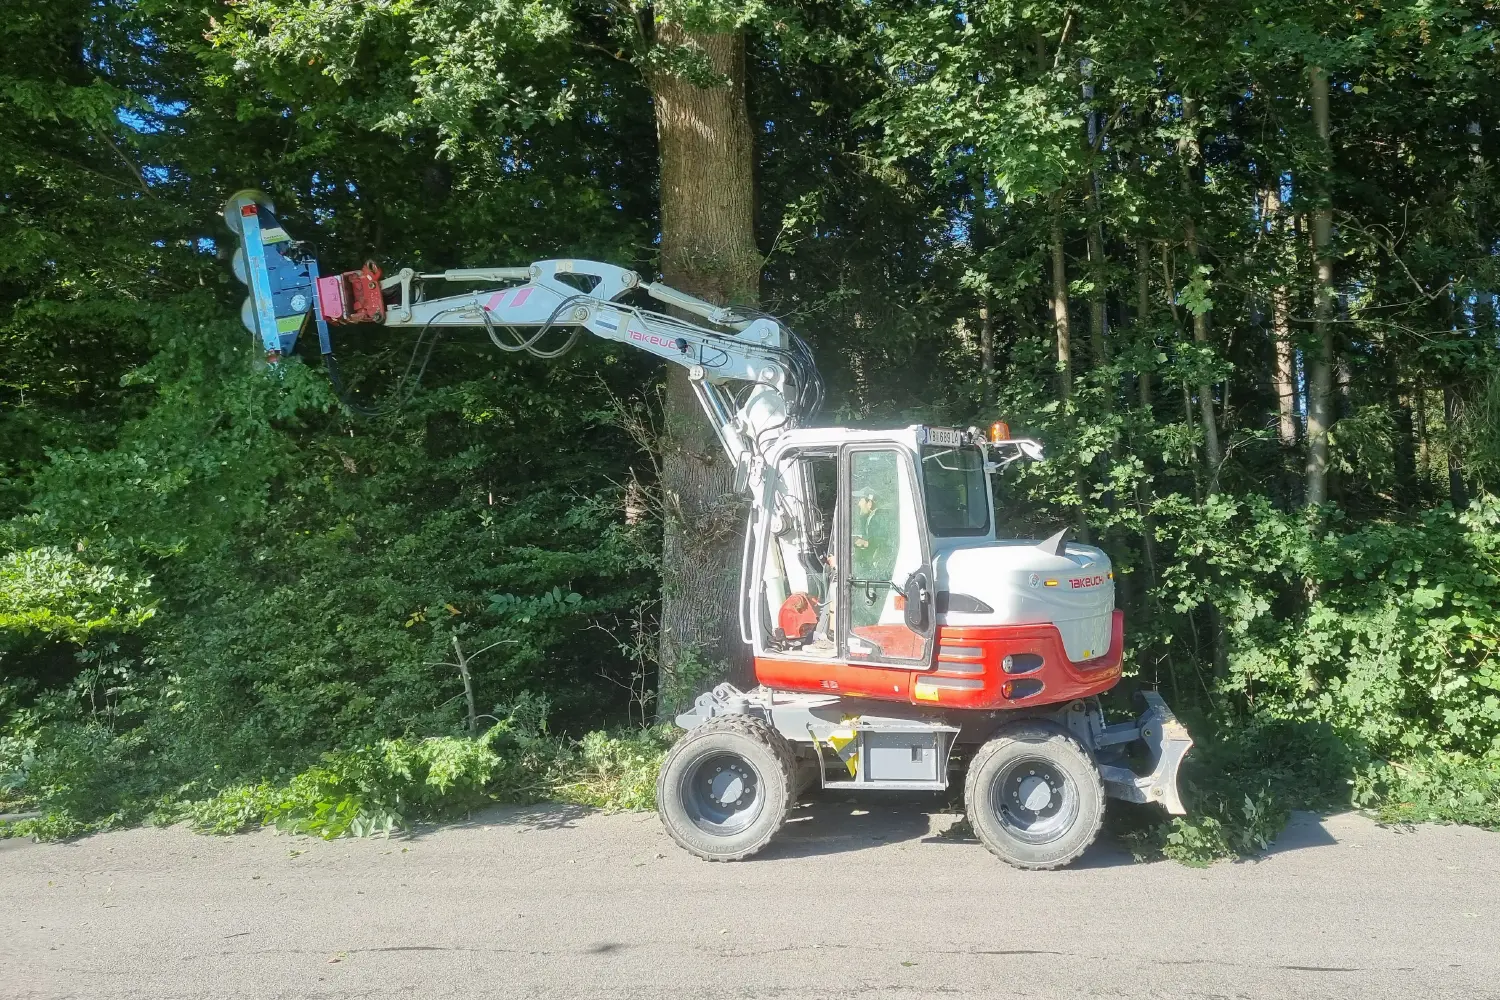 Excavator with saw head for tree maintenance